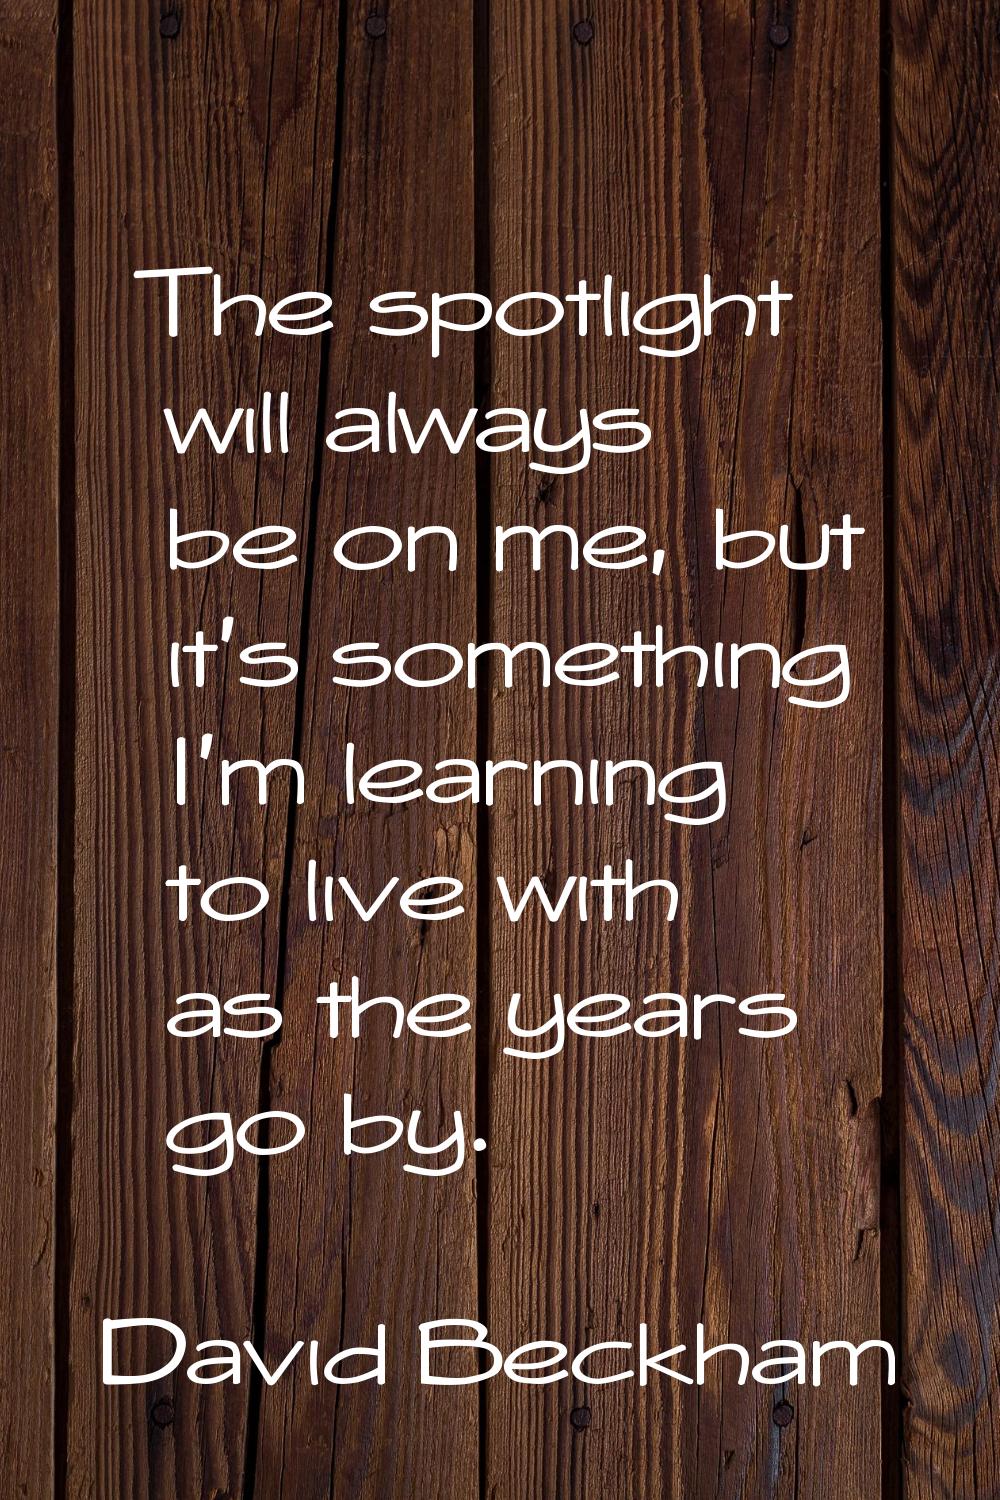 The spotlight will always be on me, but it's something I'm learning to live with as the years go by